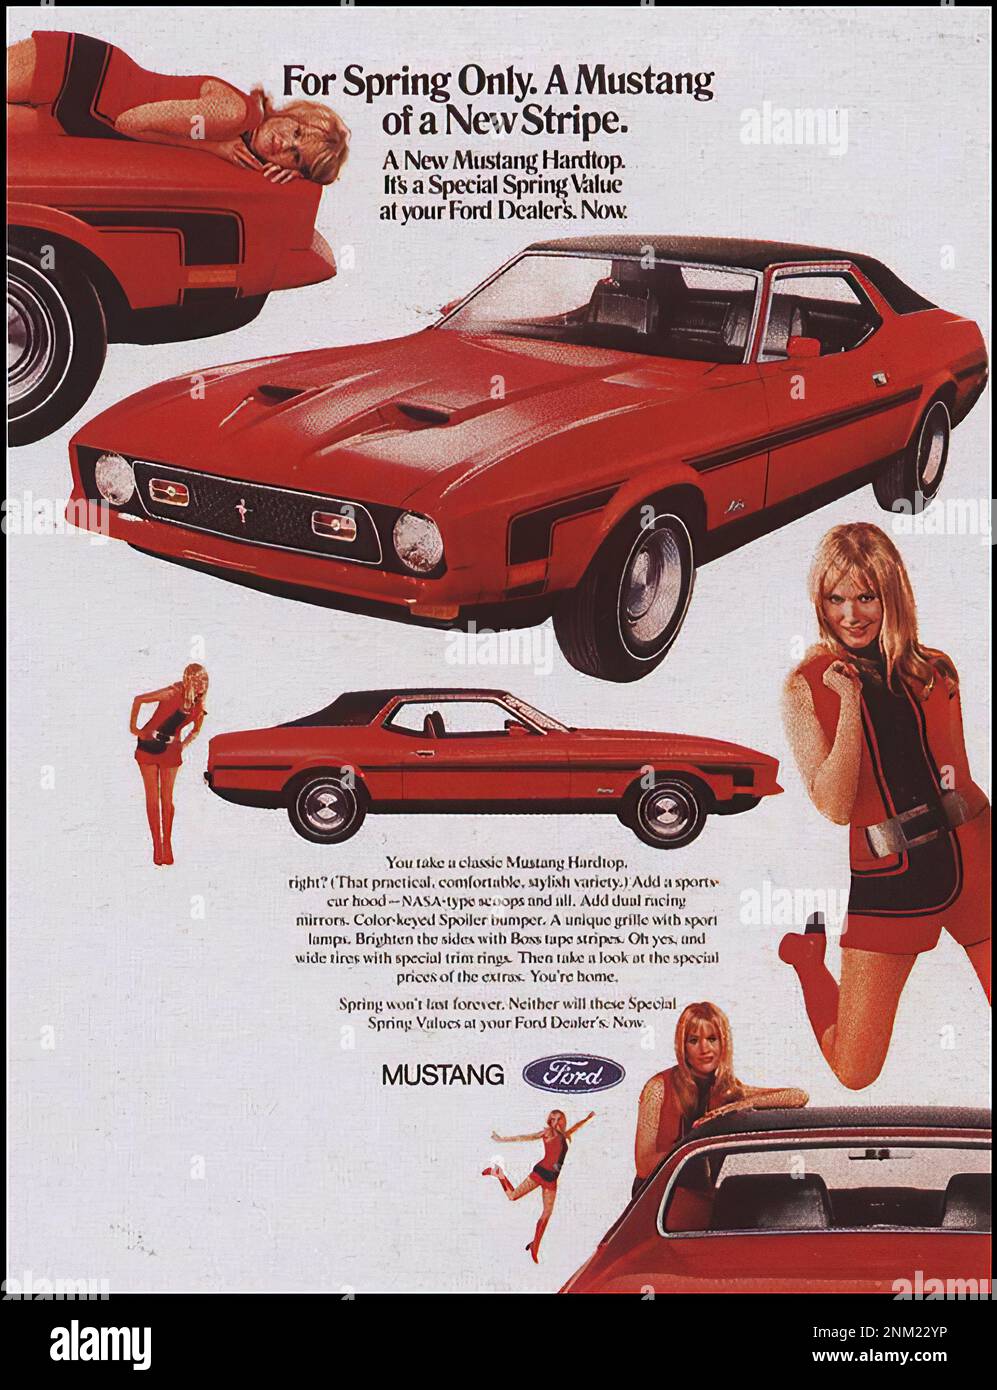 FORD Mustang (1971) - Vintage car advertising Stock Photo